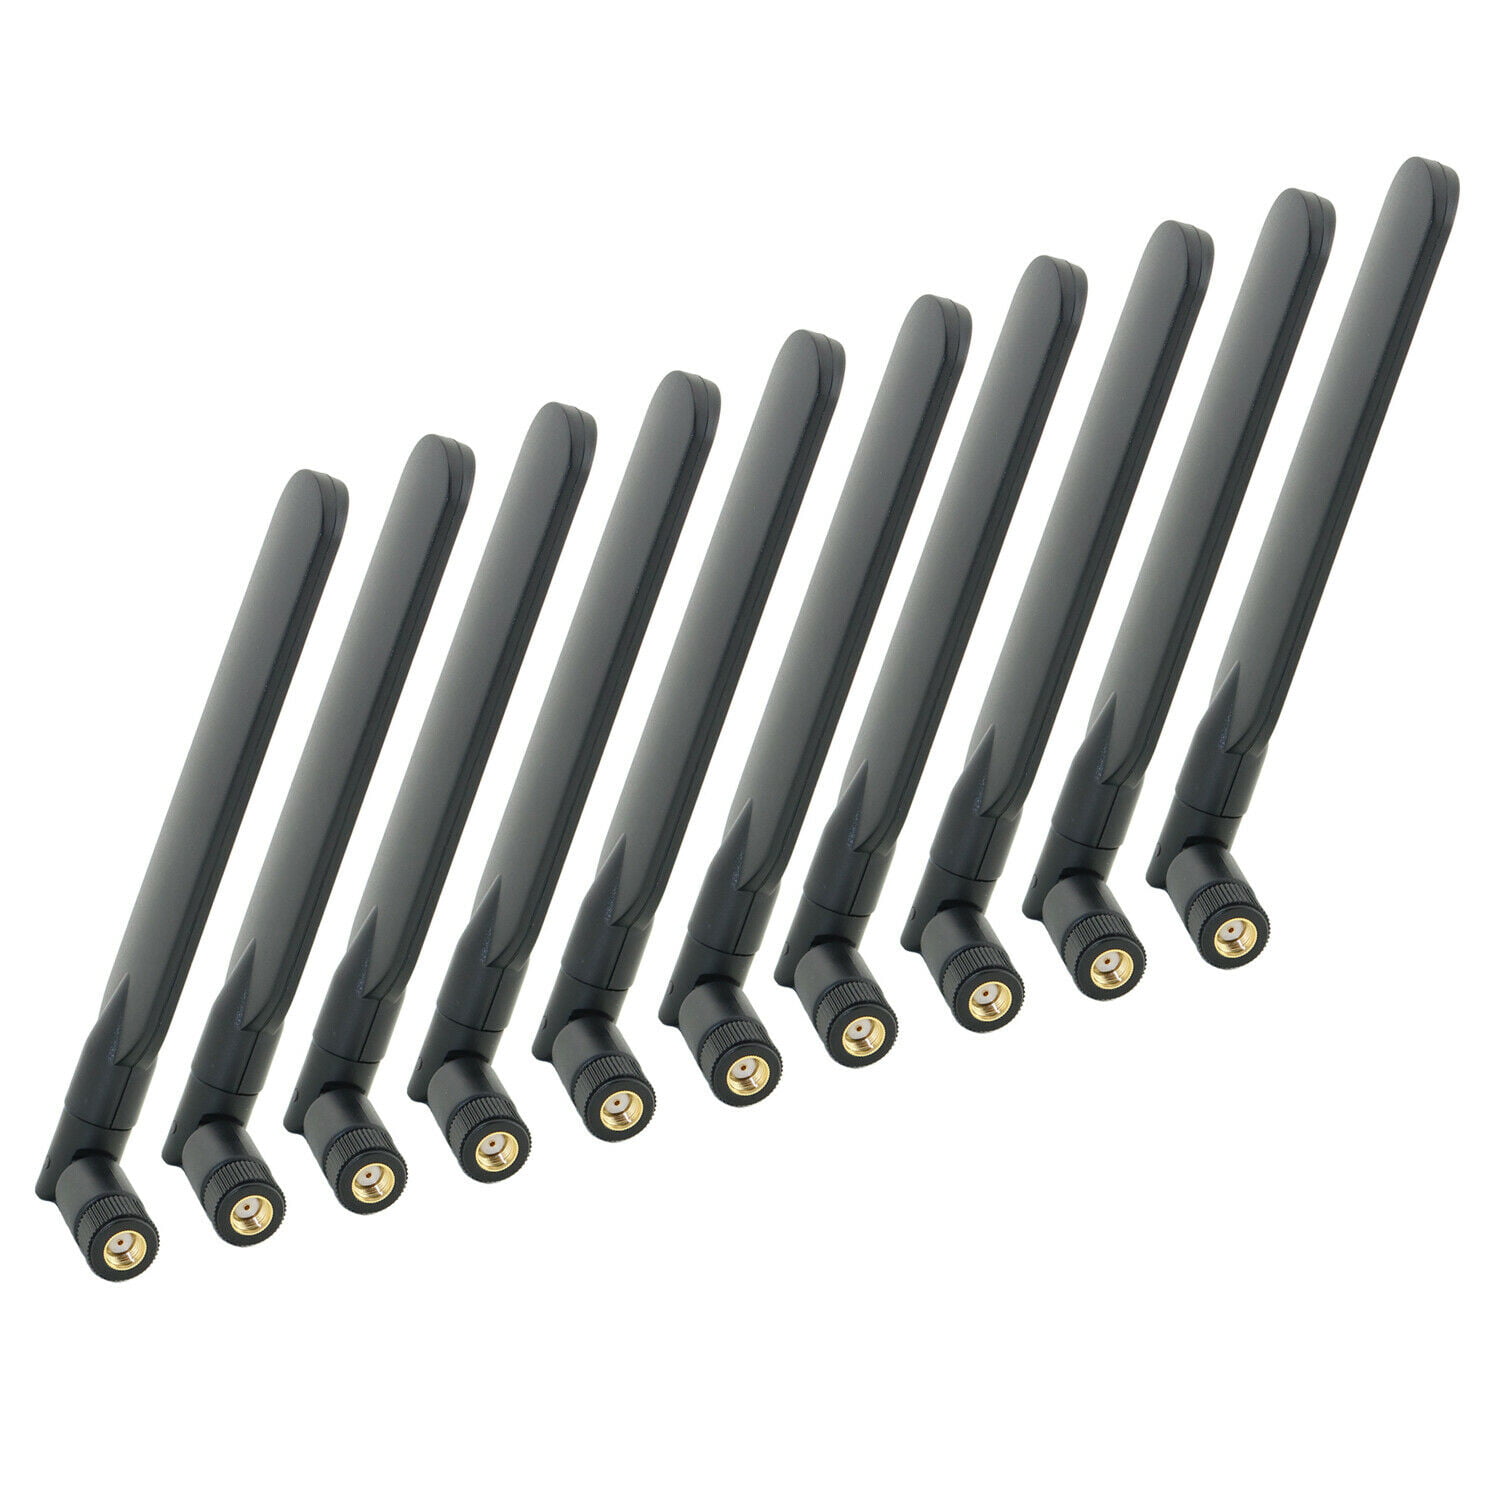 10x6dBi Dual Band RP-SMA wifi Antenna  Omni Directional for Asus Router